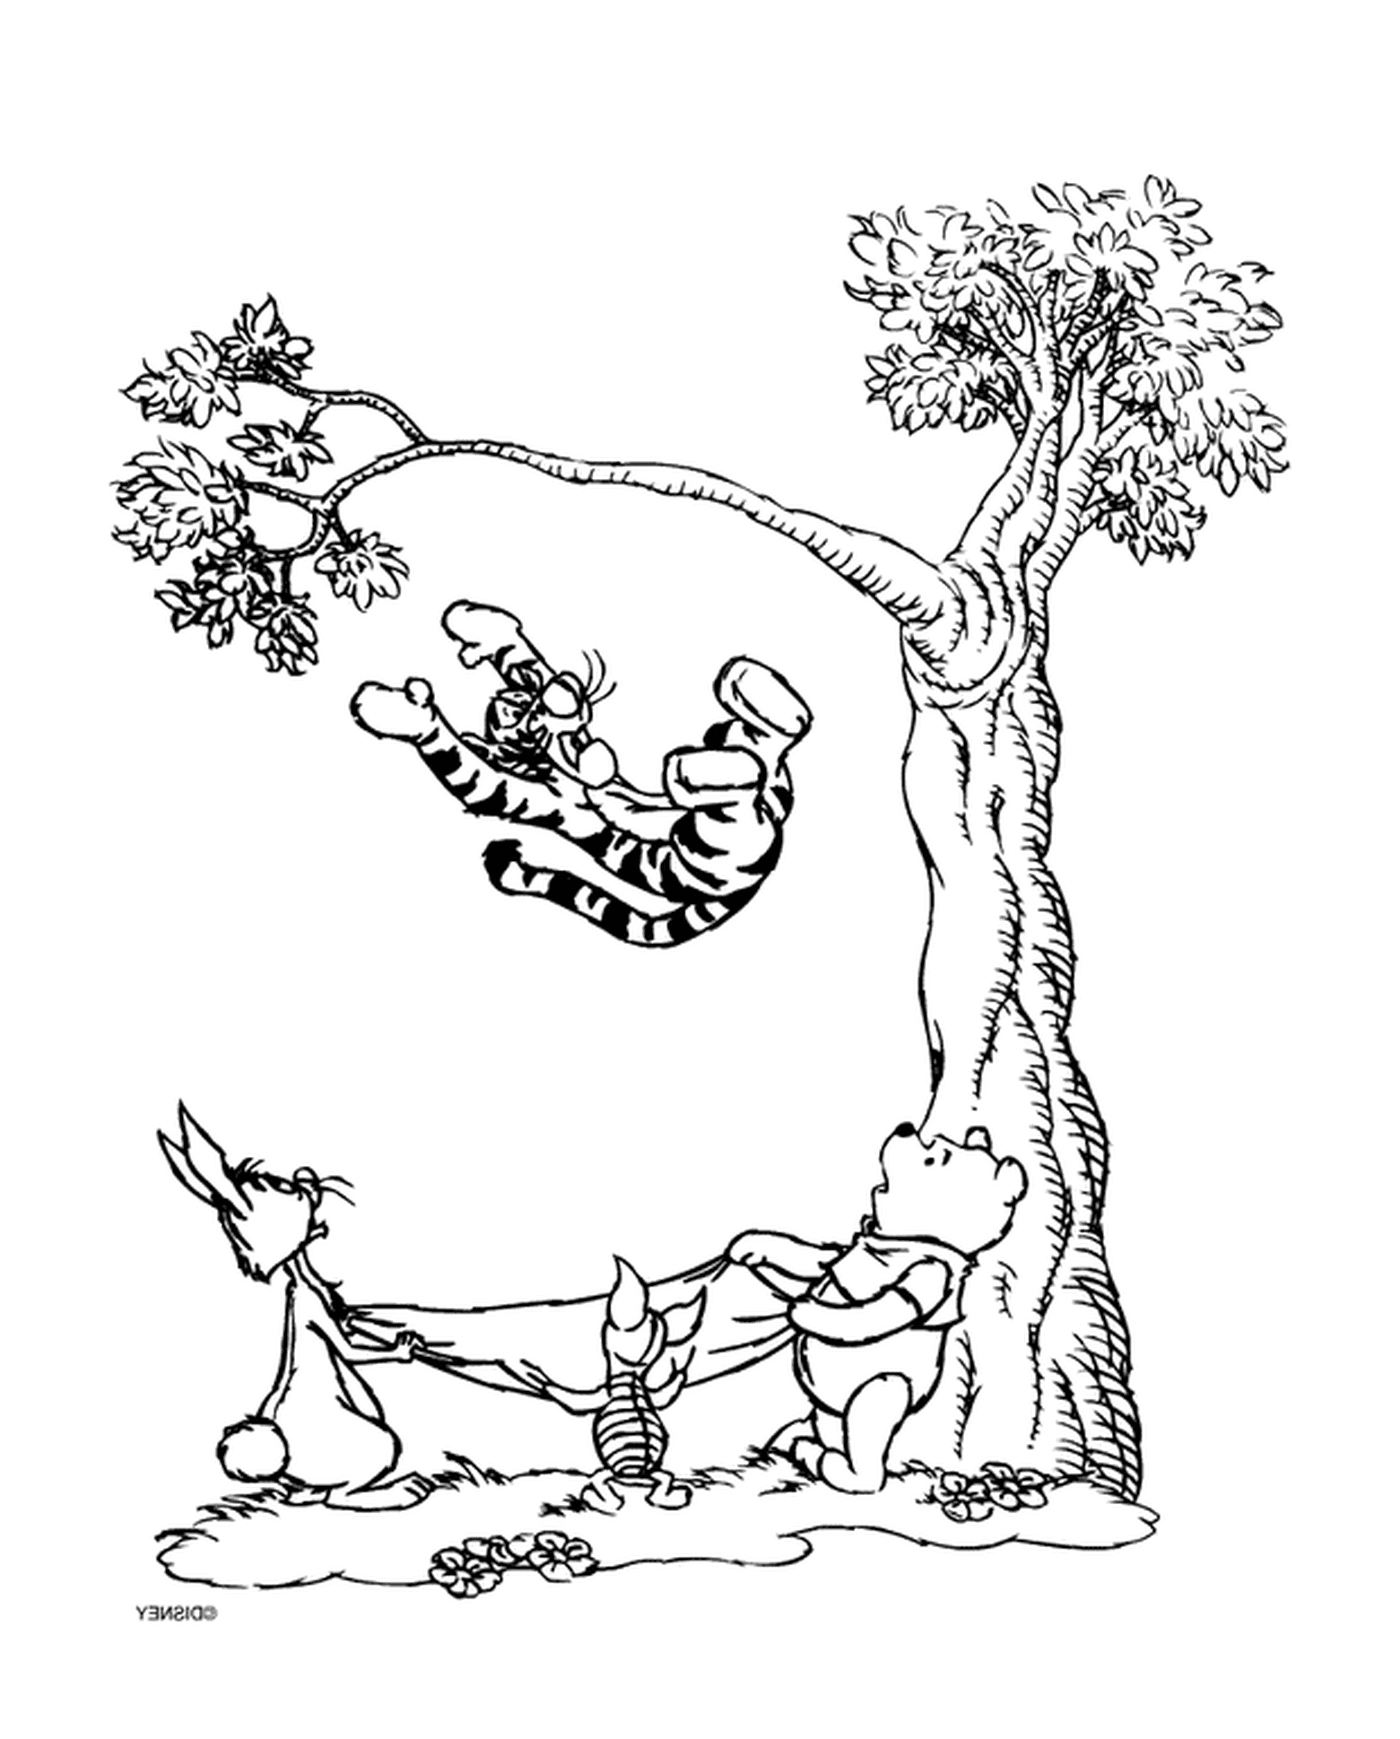  Winnie the bear and Tigrou on a tree branch 